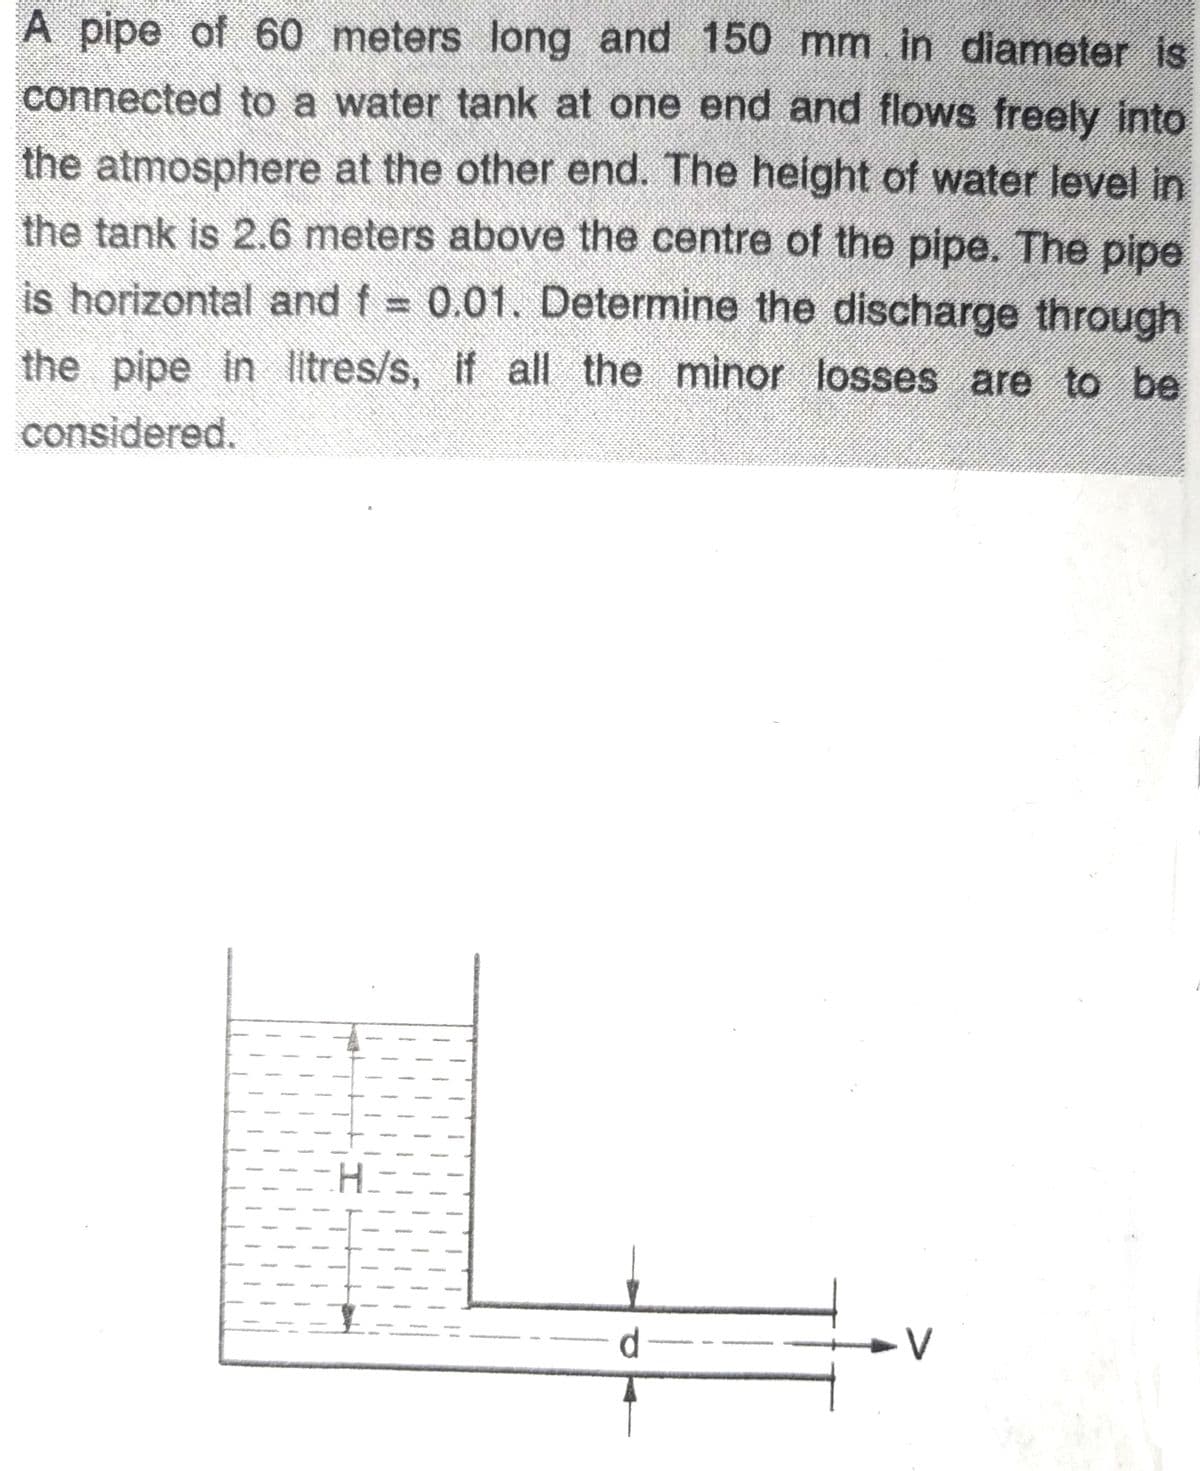 A pipe of 60 meters long and 150 mm in diameter is
connected to a water tank at one end and flows freely into
the atmosphere at the other end. The height of water level in
the tank is 2.6 meters above the centre of the pipe. The pipe
is horizontal and f = 0.01. Determine the discharge through
the pipe in litres/s, if all the minor losses are to be
considered.
H
- V
d